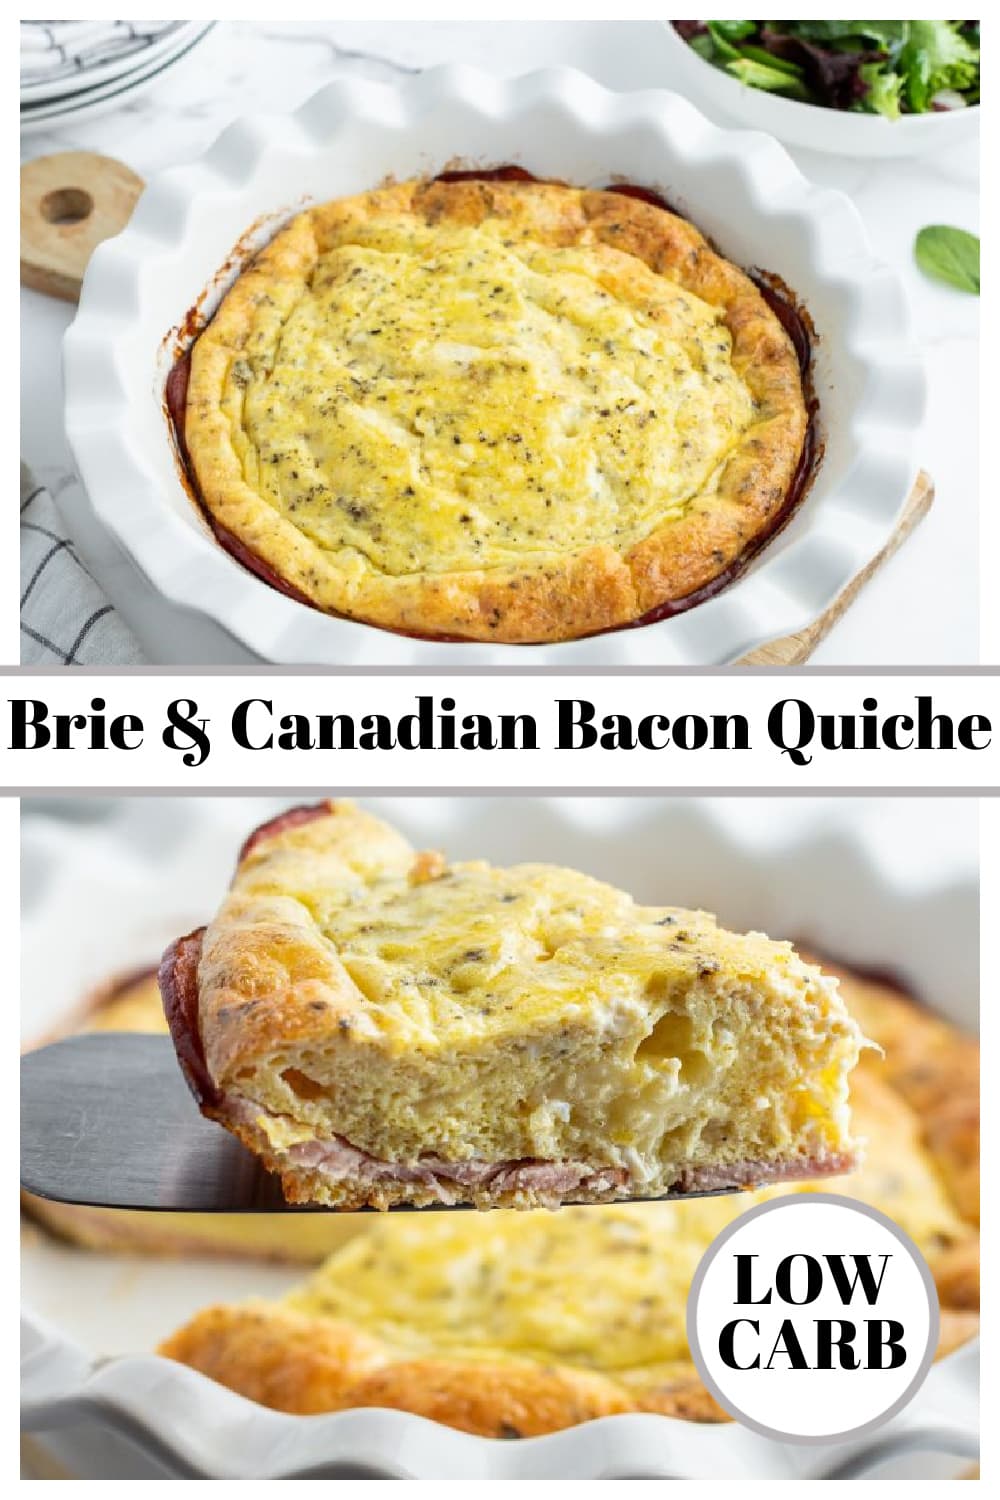 Brie and Canadian Bacon Quiche - Recipe Girl